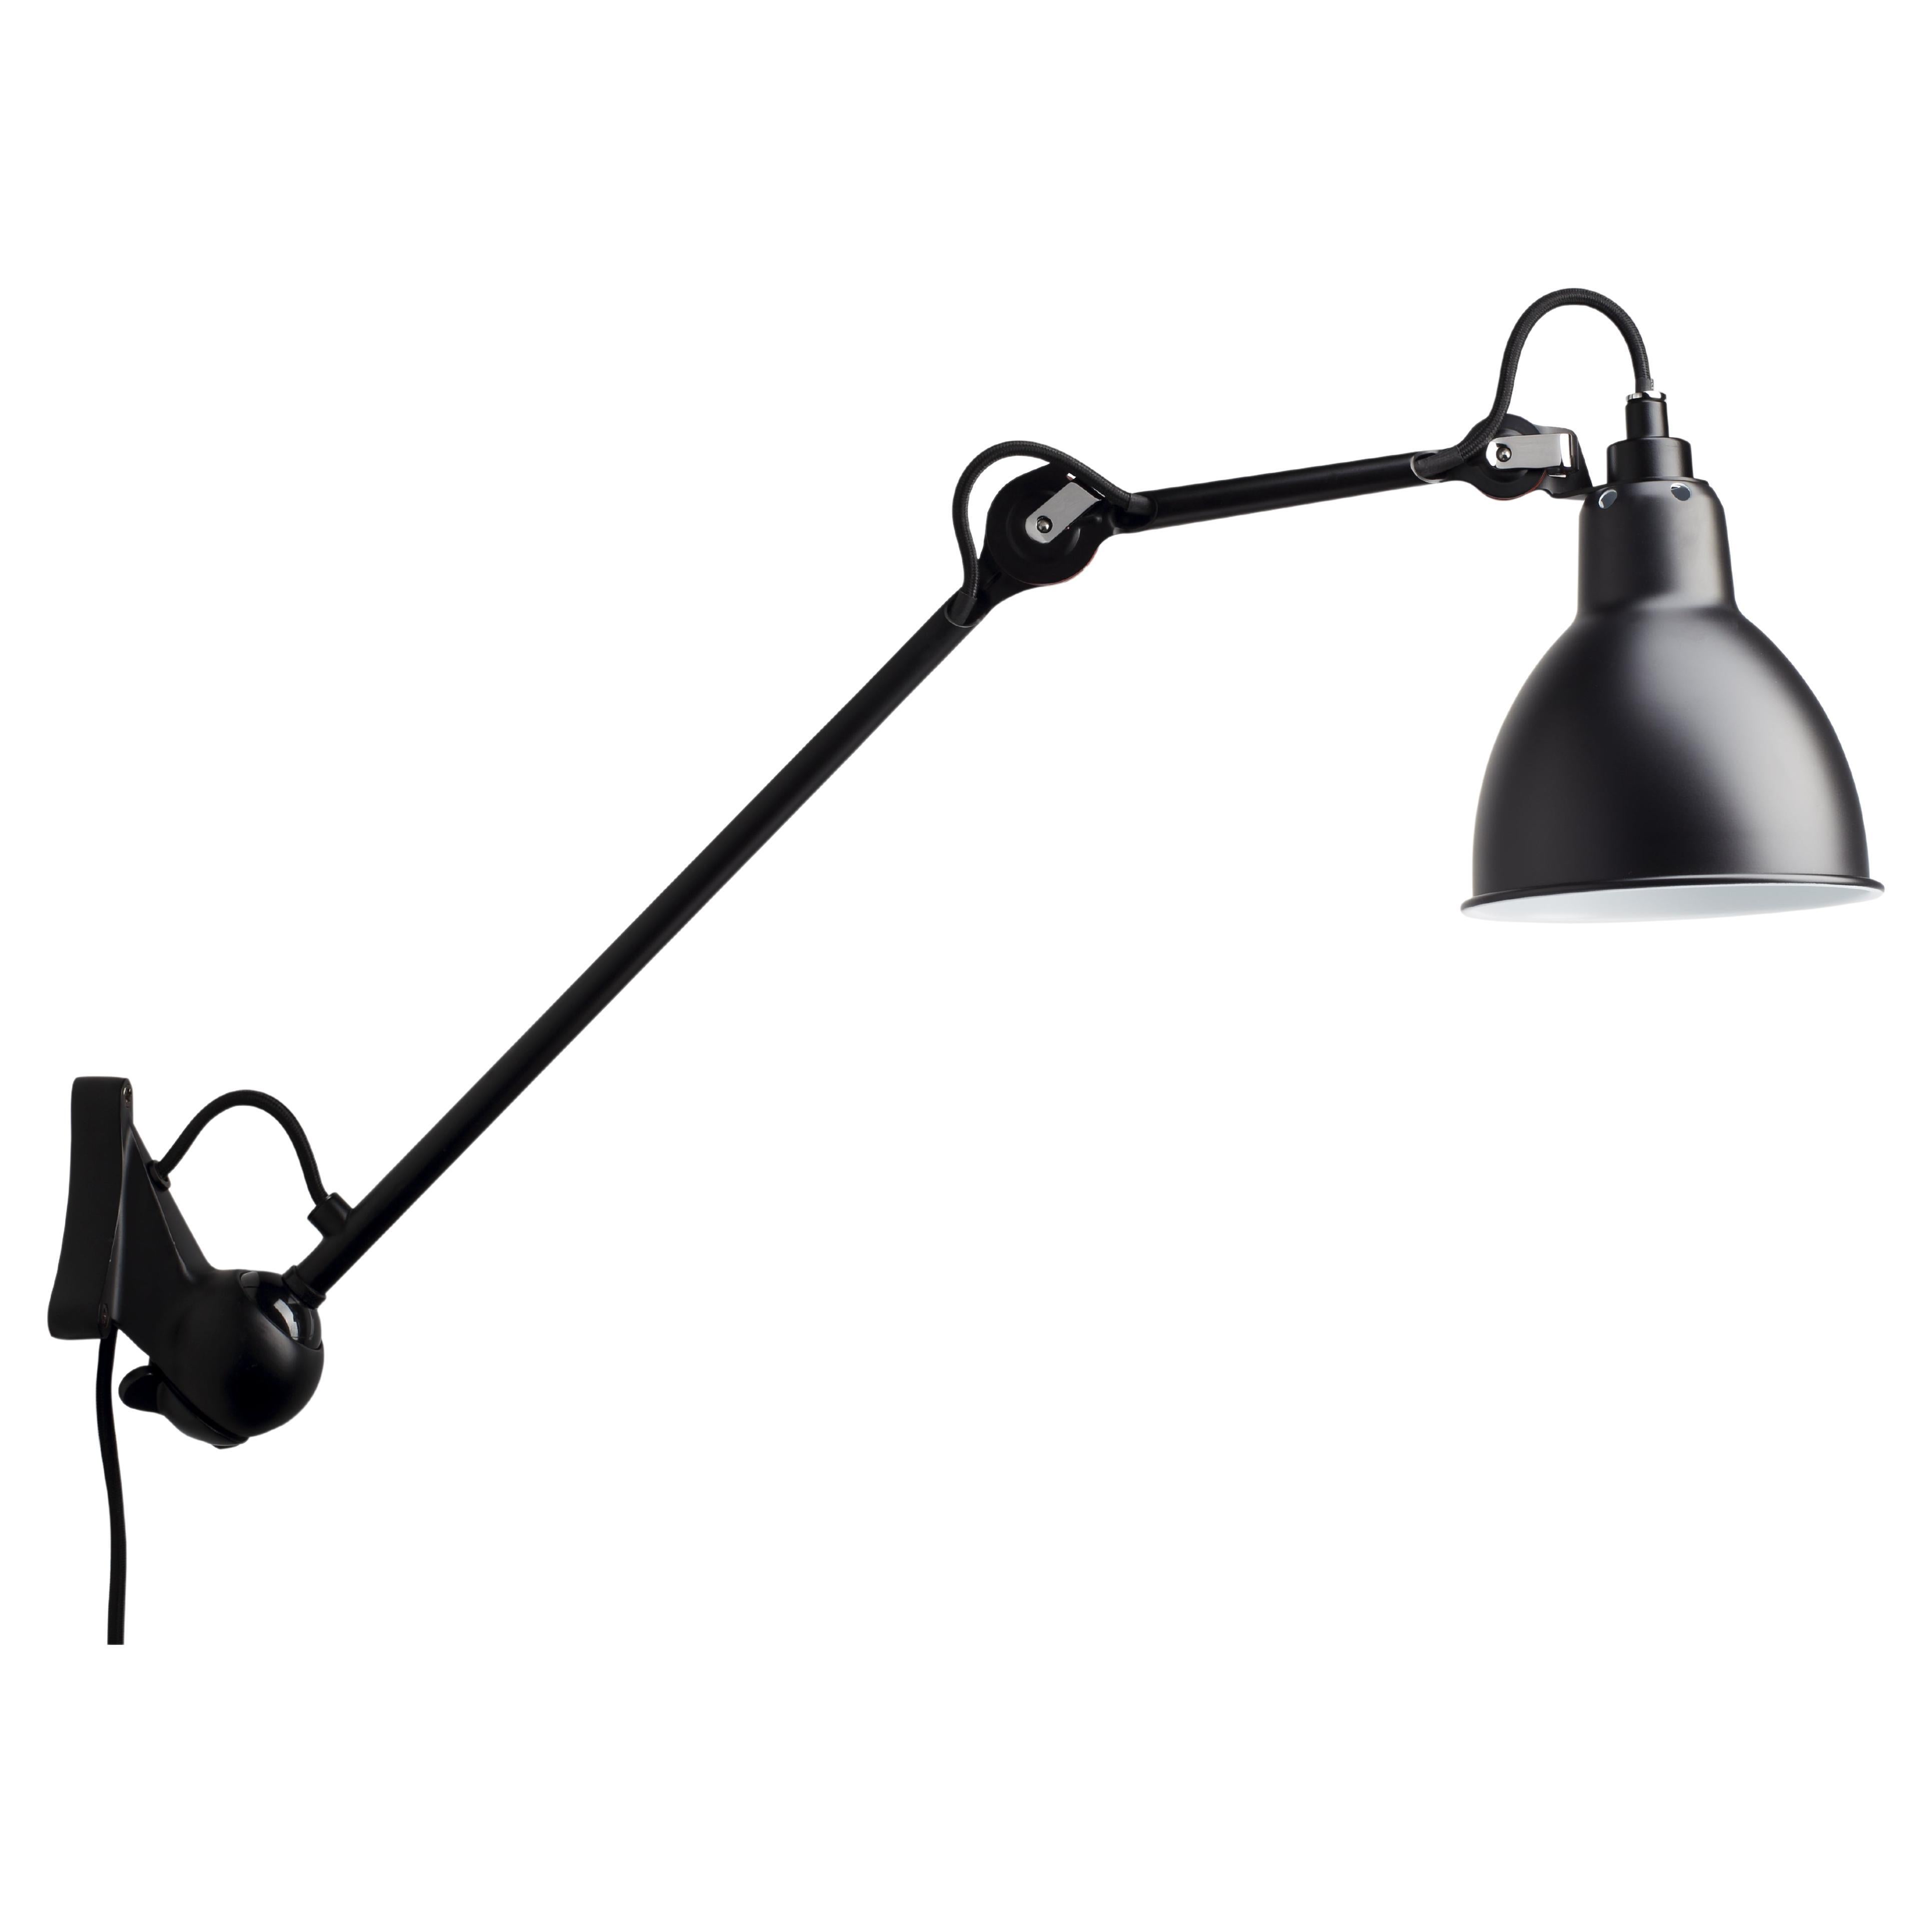 DCW Editions La Lampe Gras N°222 Wall Lamp in Black Arm and Black Shade